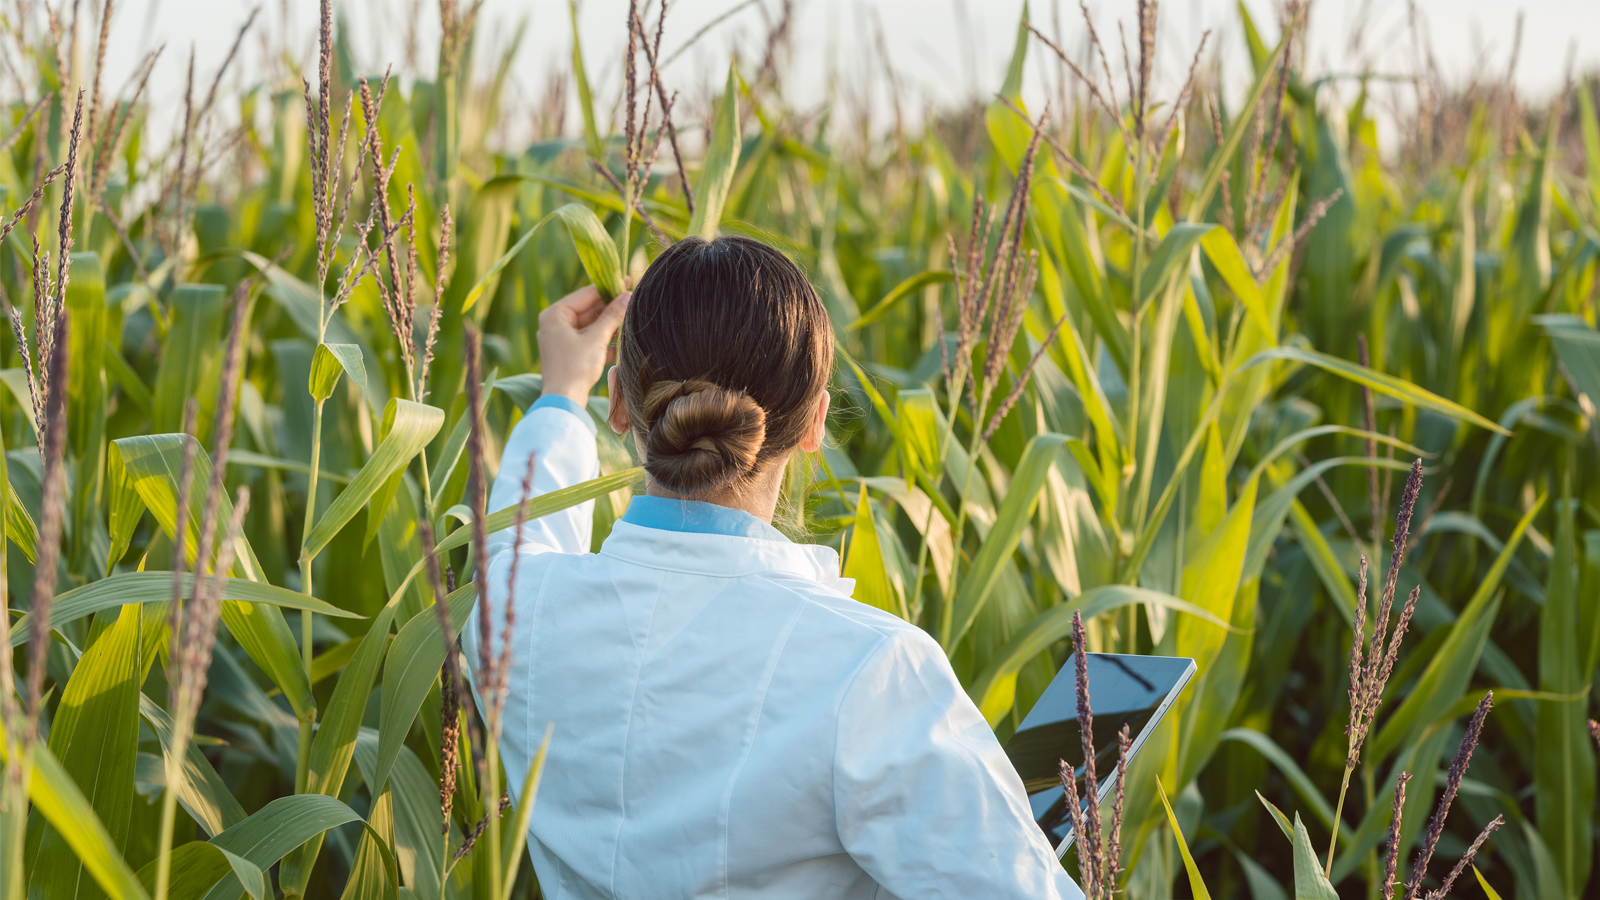 Female scientist facing their back is holding a tech device doing testing in a corn field